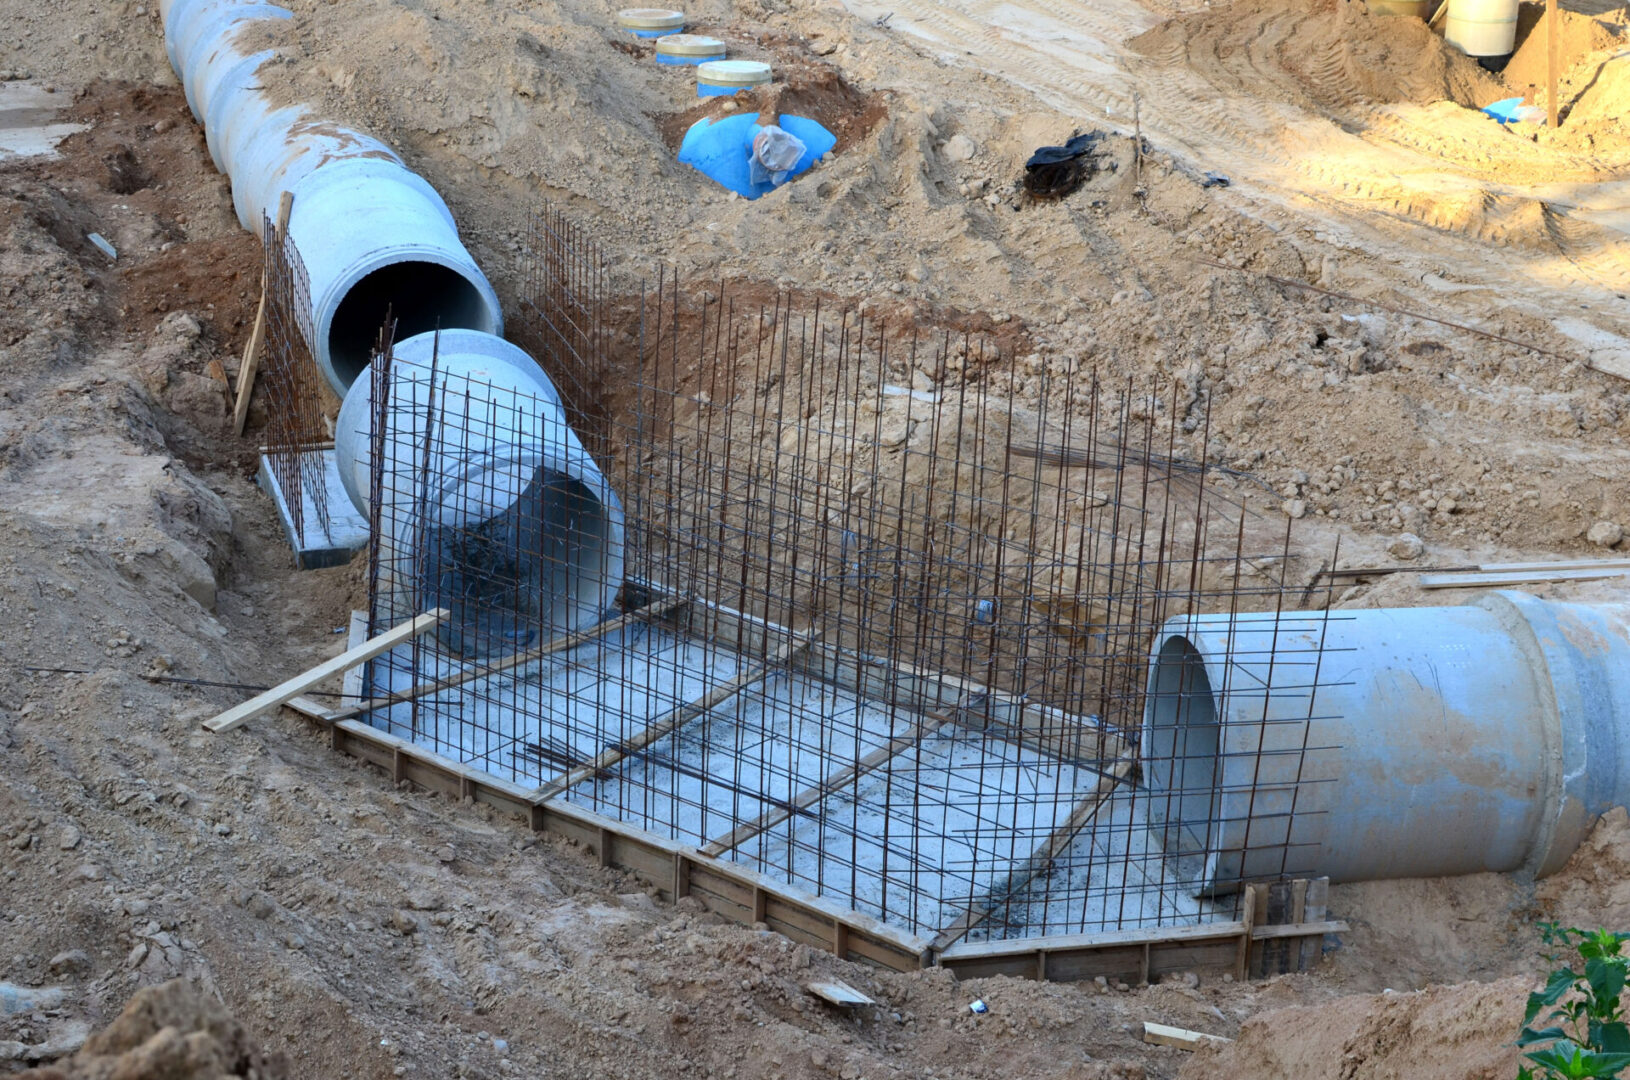 A construction site with pipes and cages in the sand.